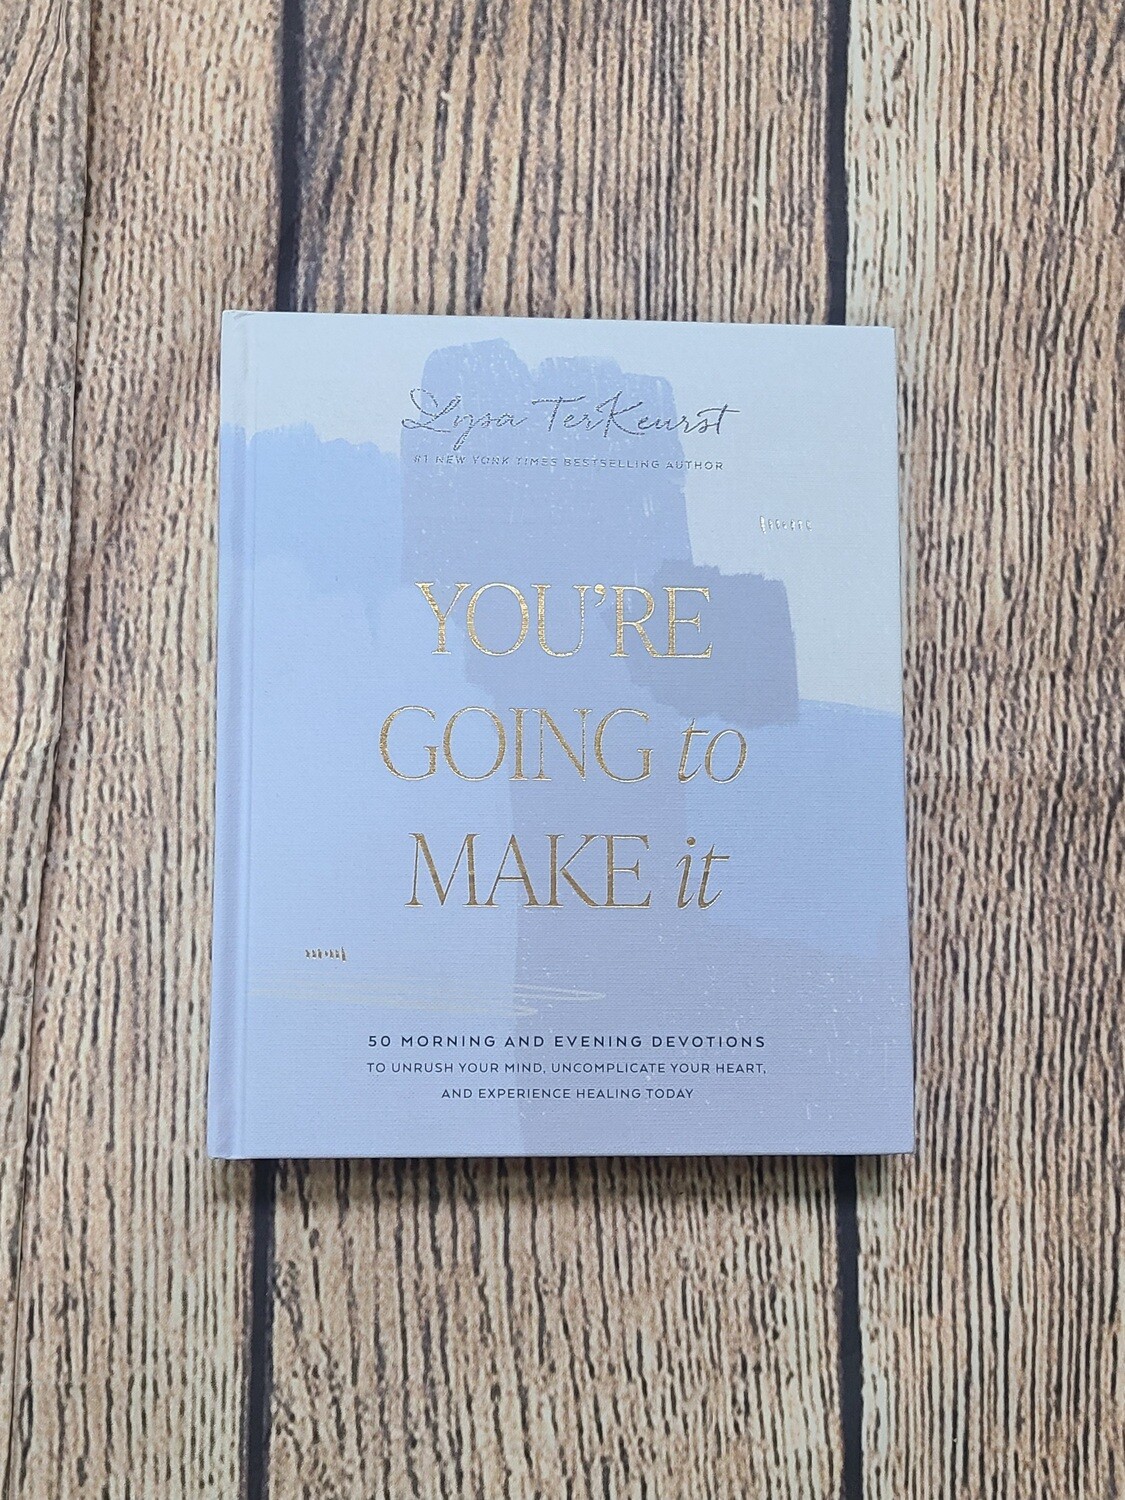 You're Going to Make It by Lysa Terkeurst - Hardback - New